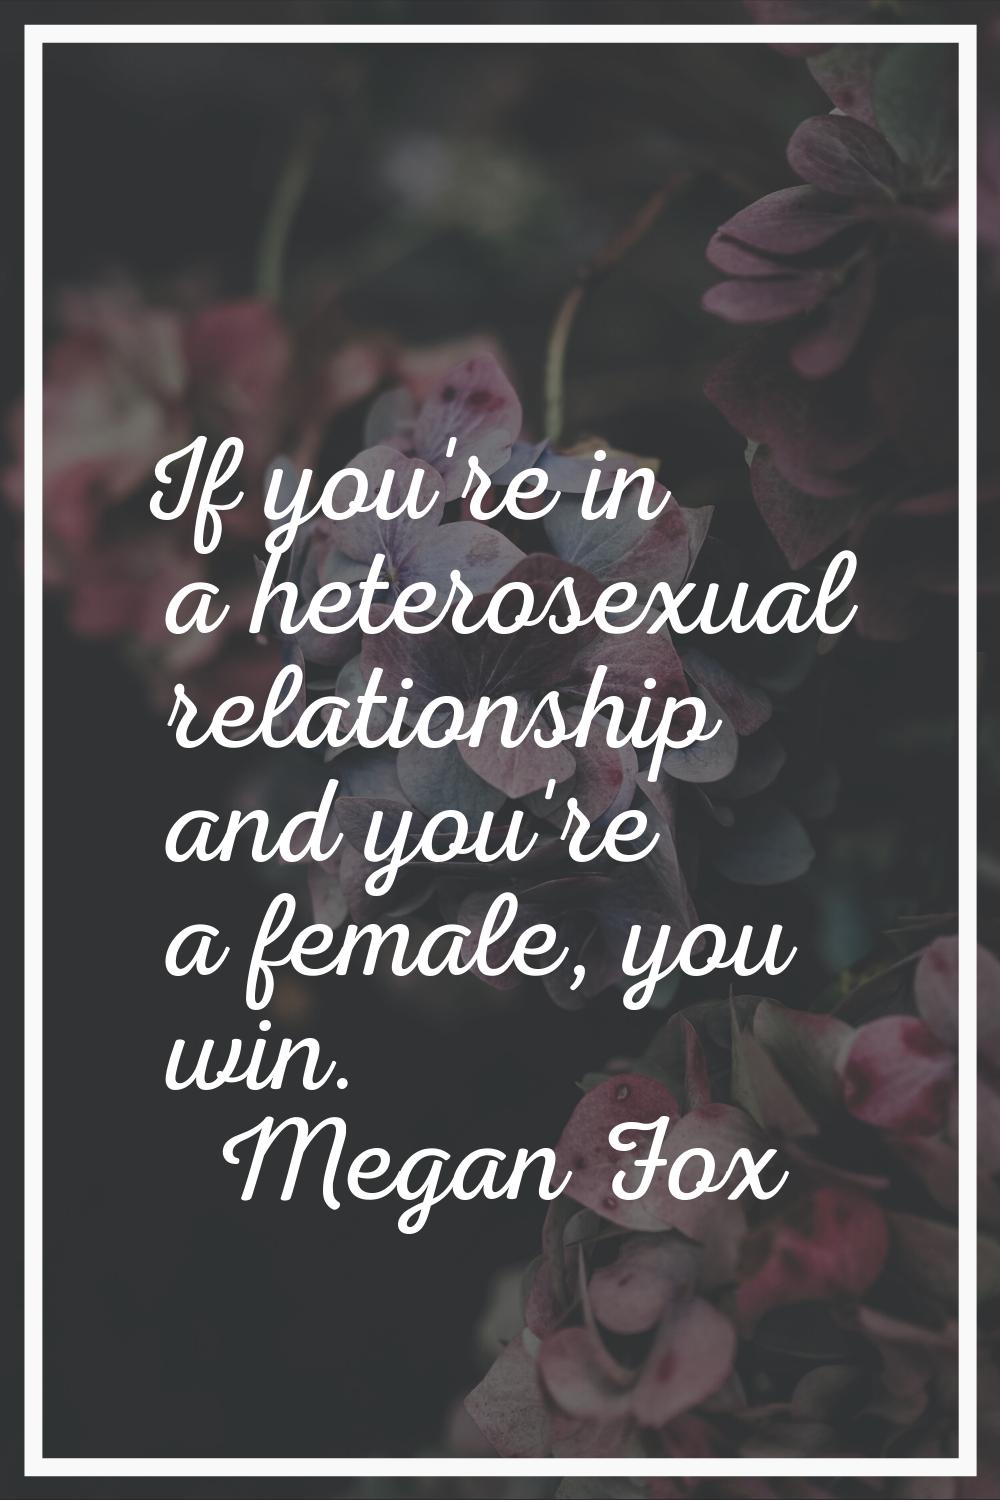 If you're in a heterosexual relationship and you're a female, you win.